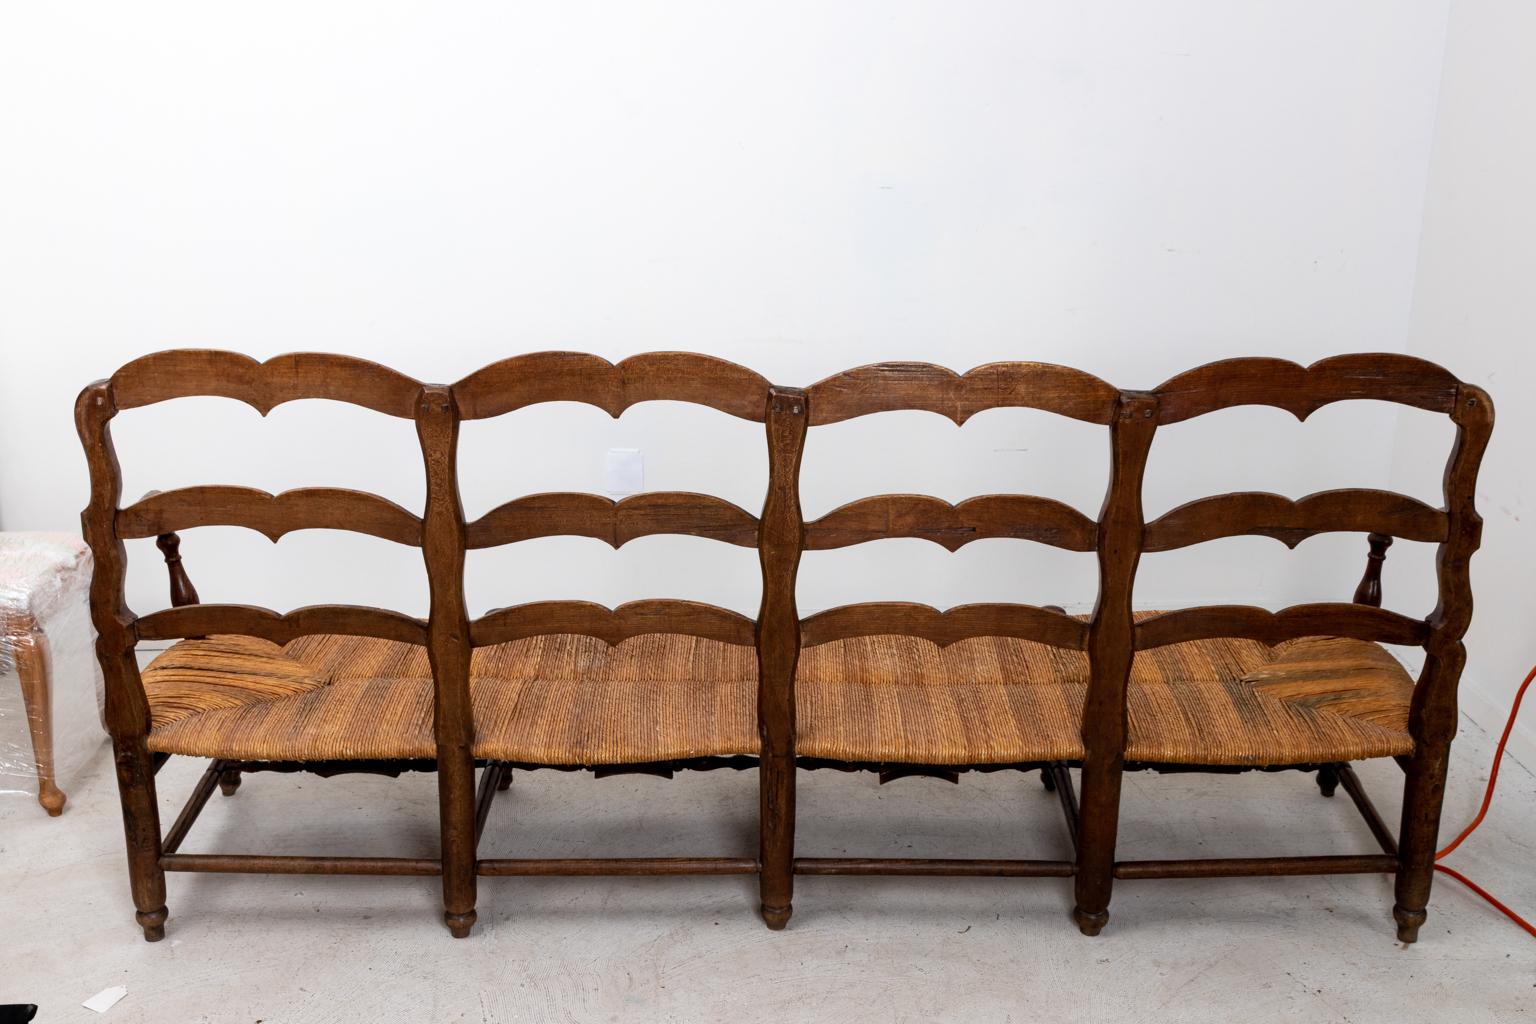 French oakwood settee with woven rushed seat and slat back, circa 19th century. The piece also features carved floral detail on the curved skirt and bottom turned stretcher. Please note of wear consistent with age including minor finish loss to the